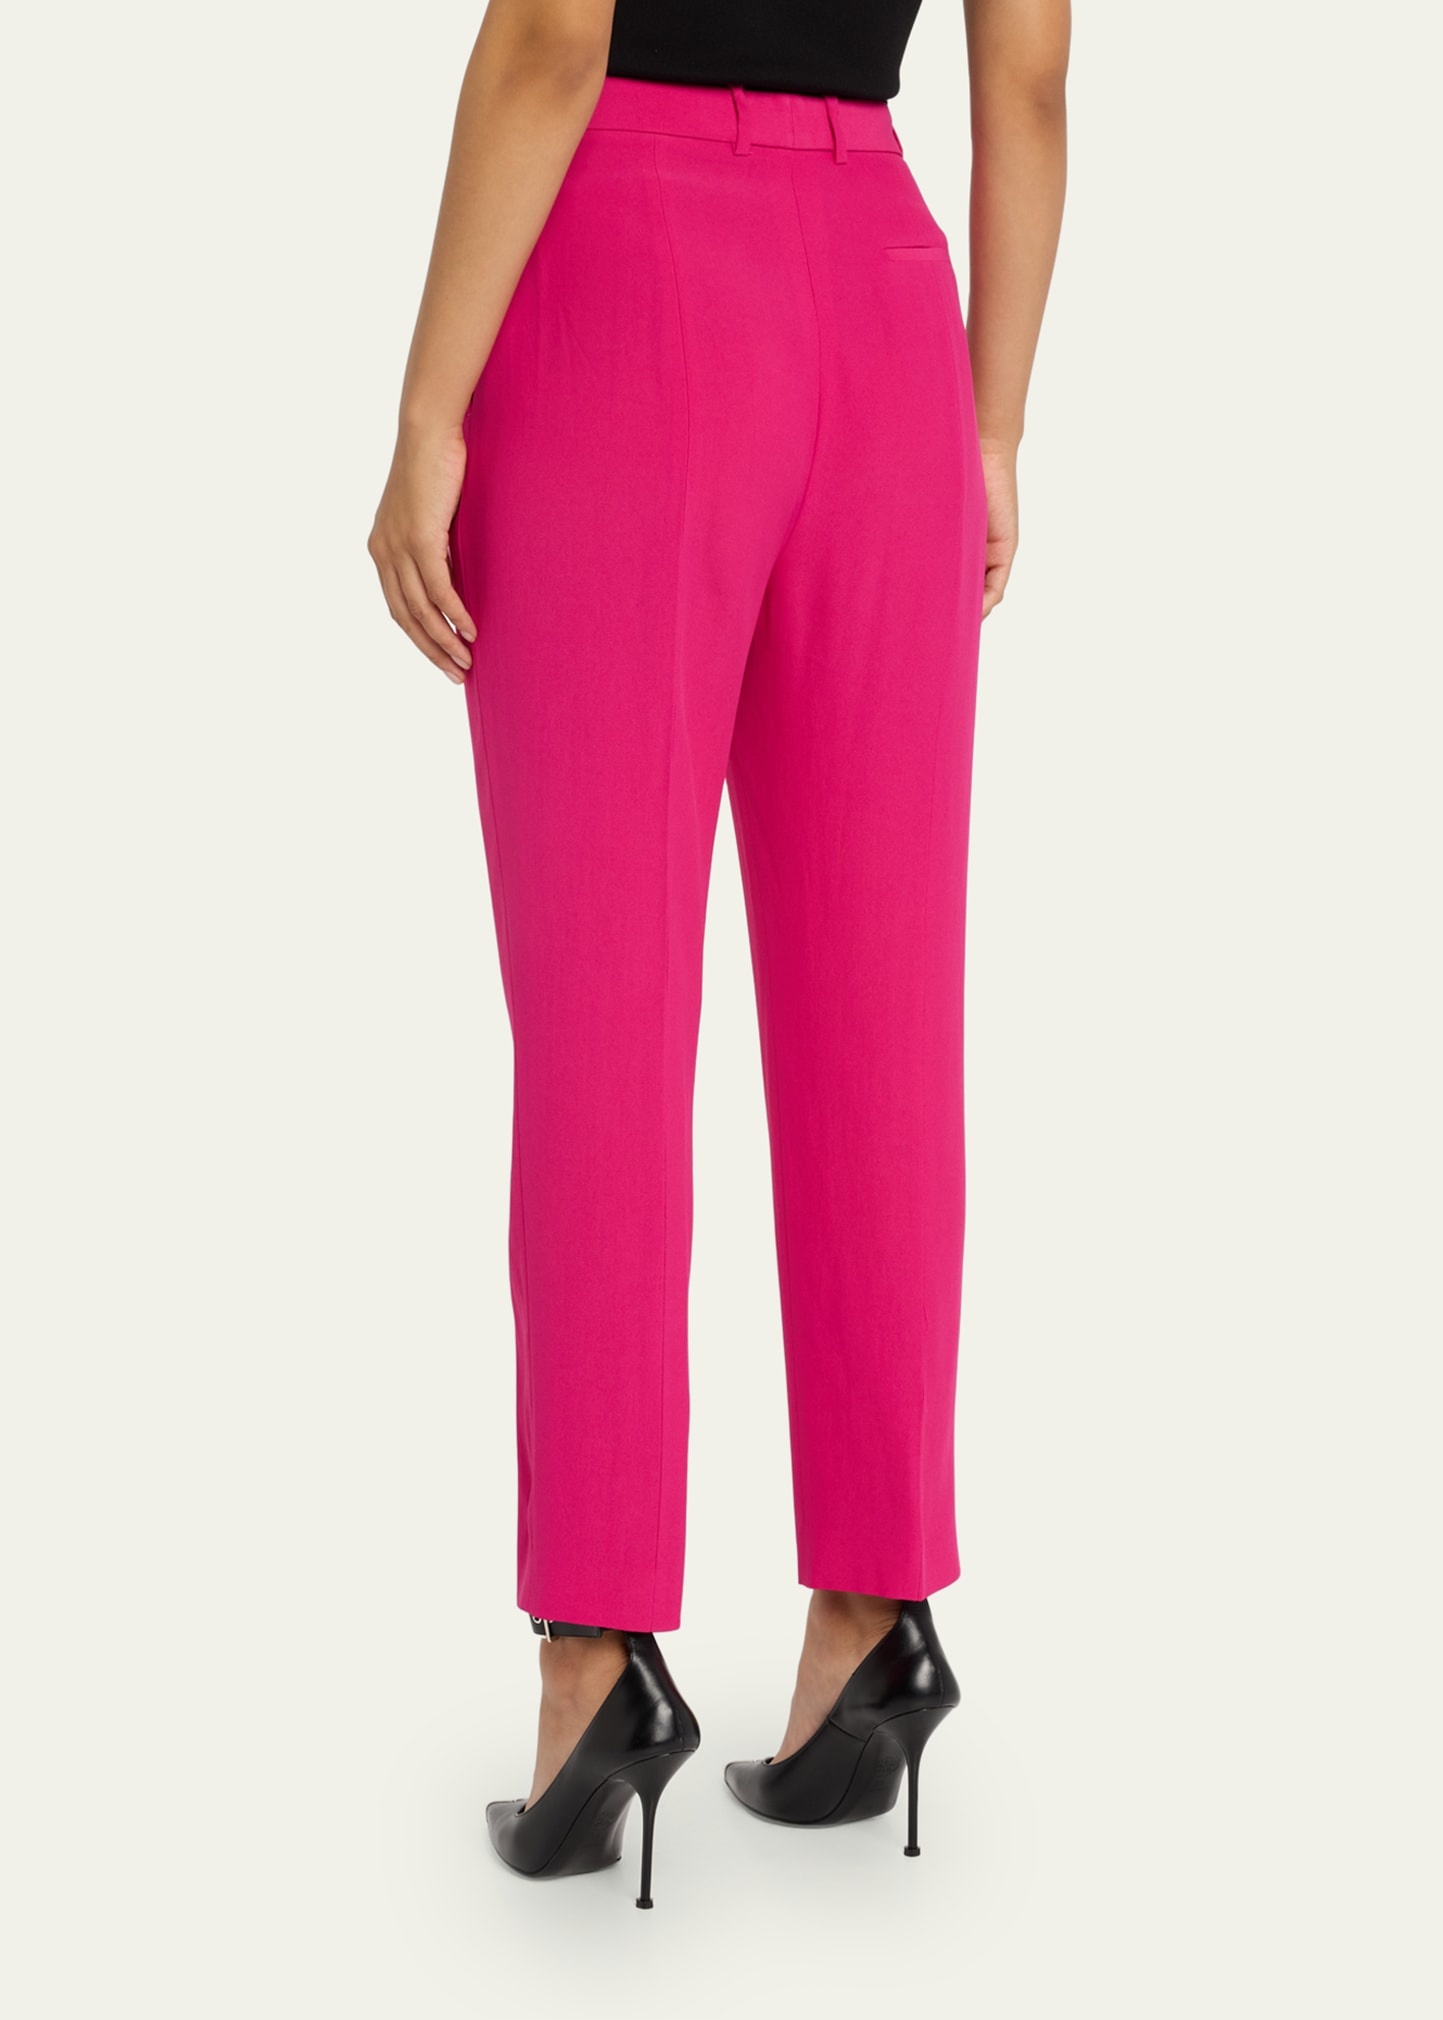 Women's High-waisted Cigarette Trousers by Alexander Mcqueen